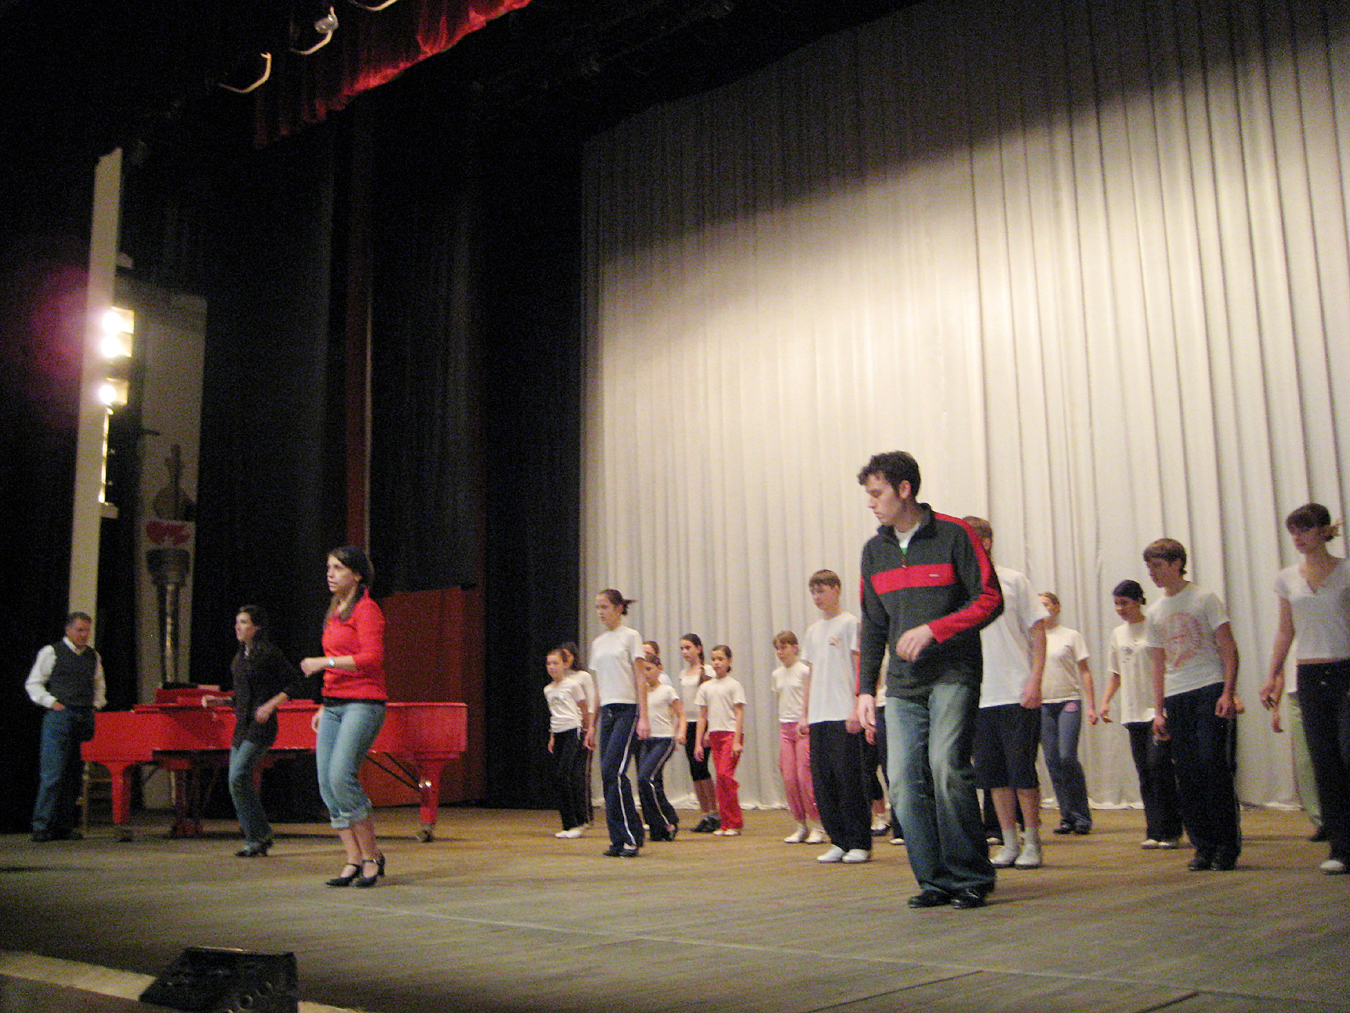 Drama students on stage dancing